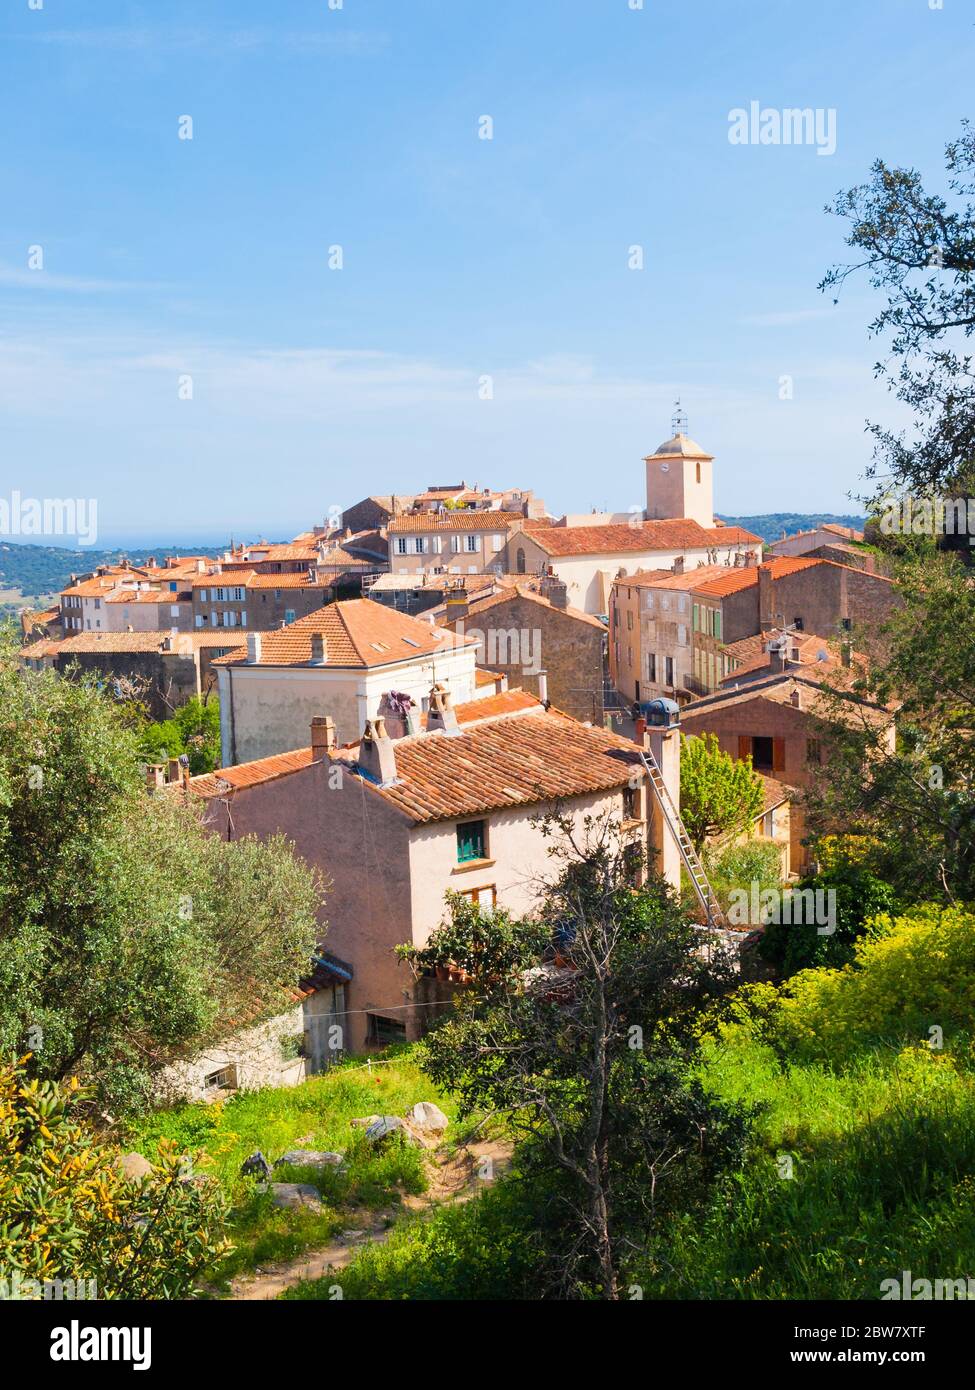 View of Ramatuelle, French Riviera, Cote d'Azur, Provence, southern France Stock Photo